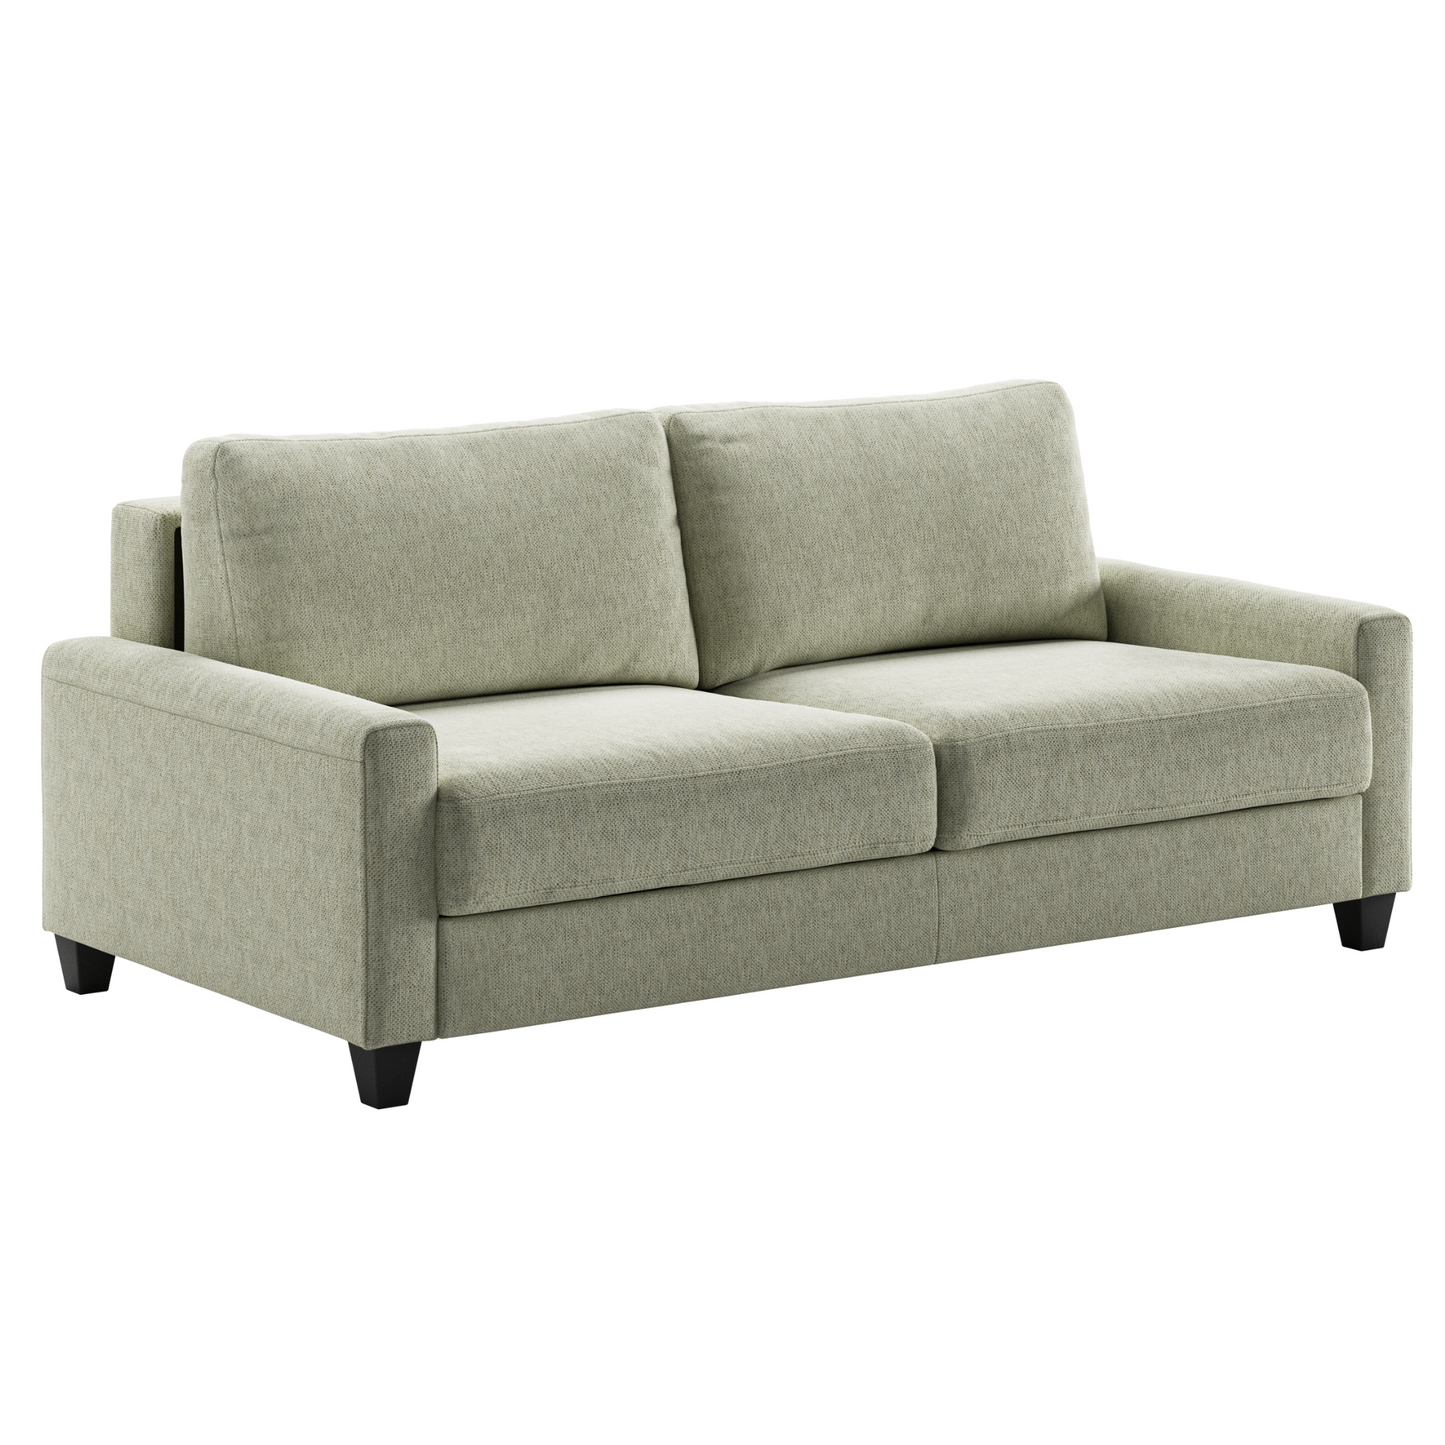 	Luonto Nico Queen Sleeper Sofa Quick Ship Program Loule 616 Fabric (beige) with Wood Leg Side View 